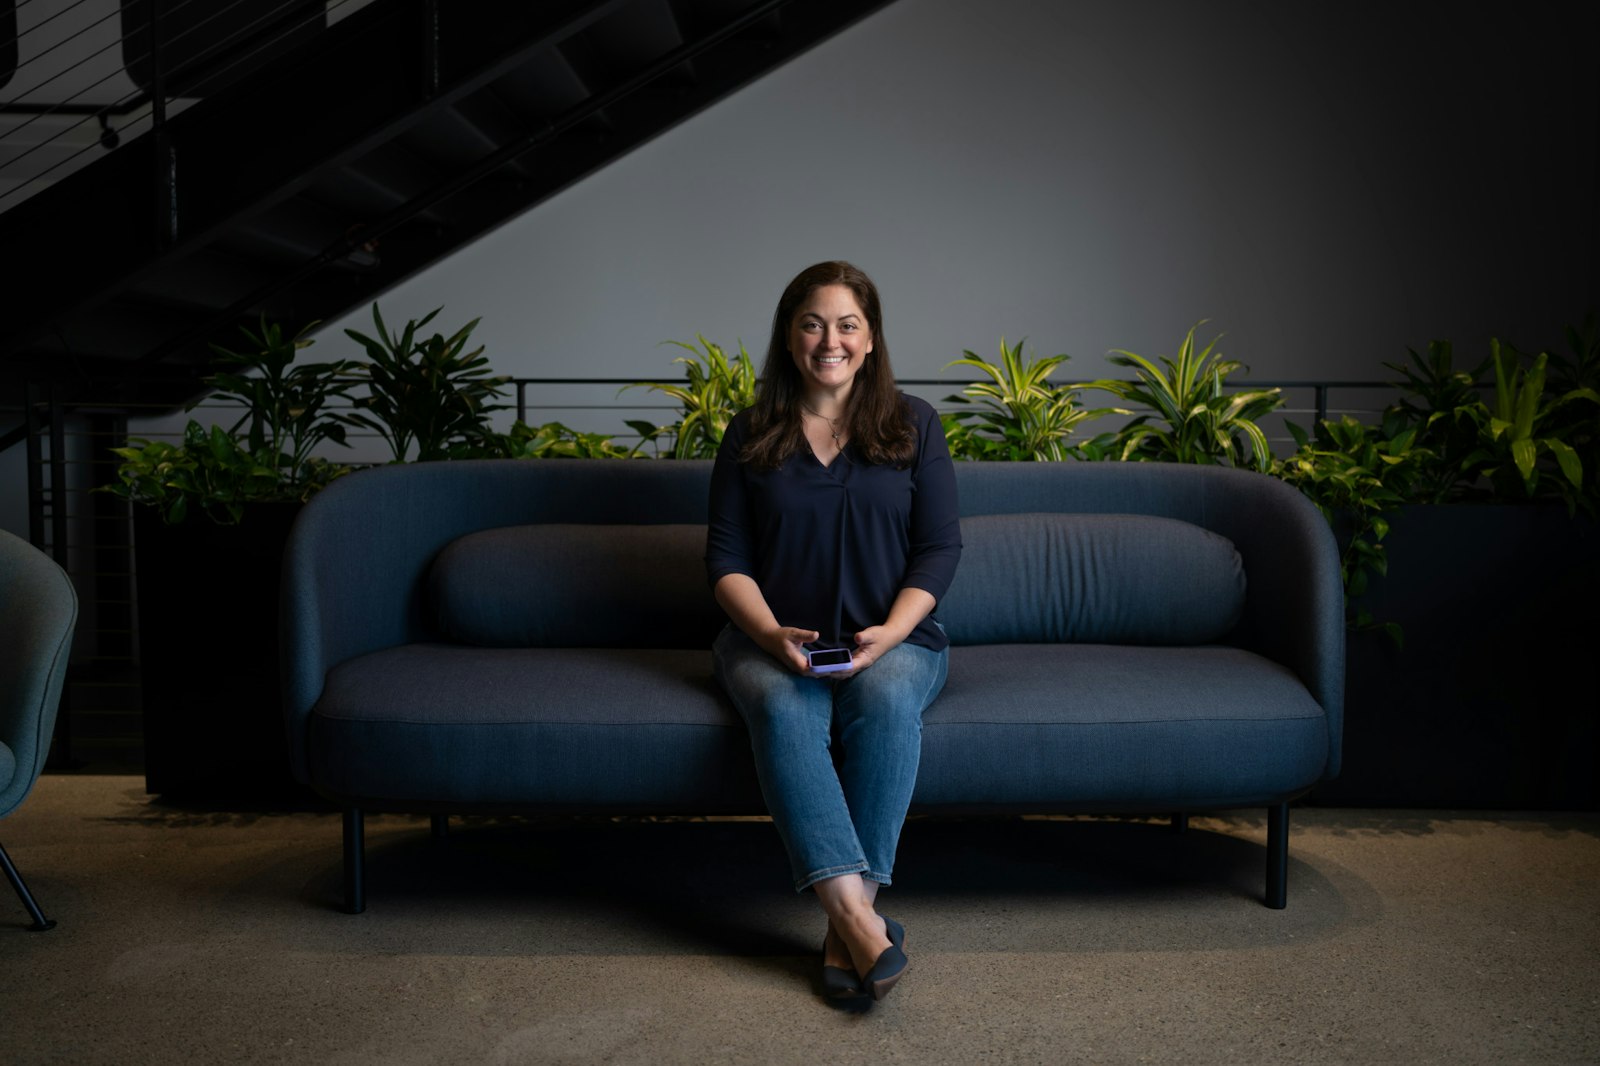 zoox employee lindsay sitting on a couch